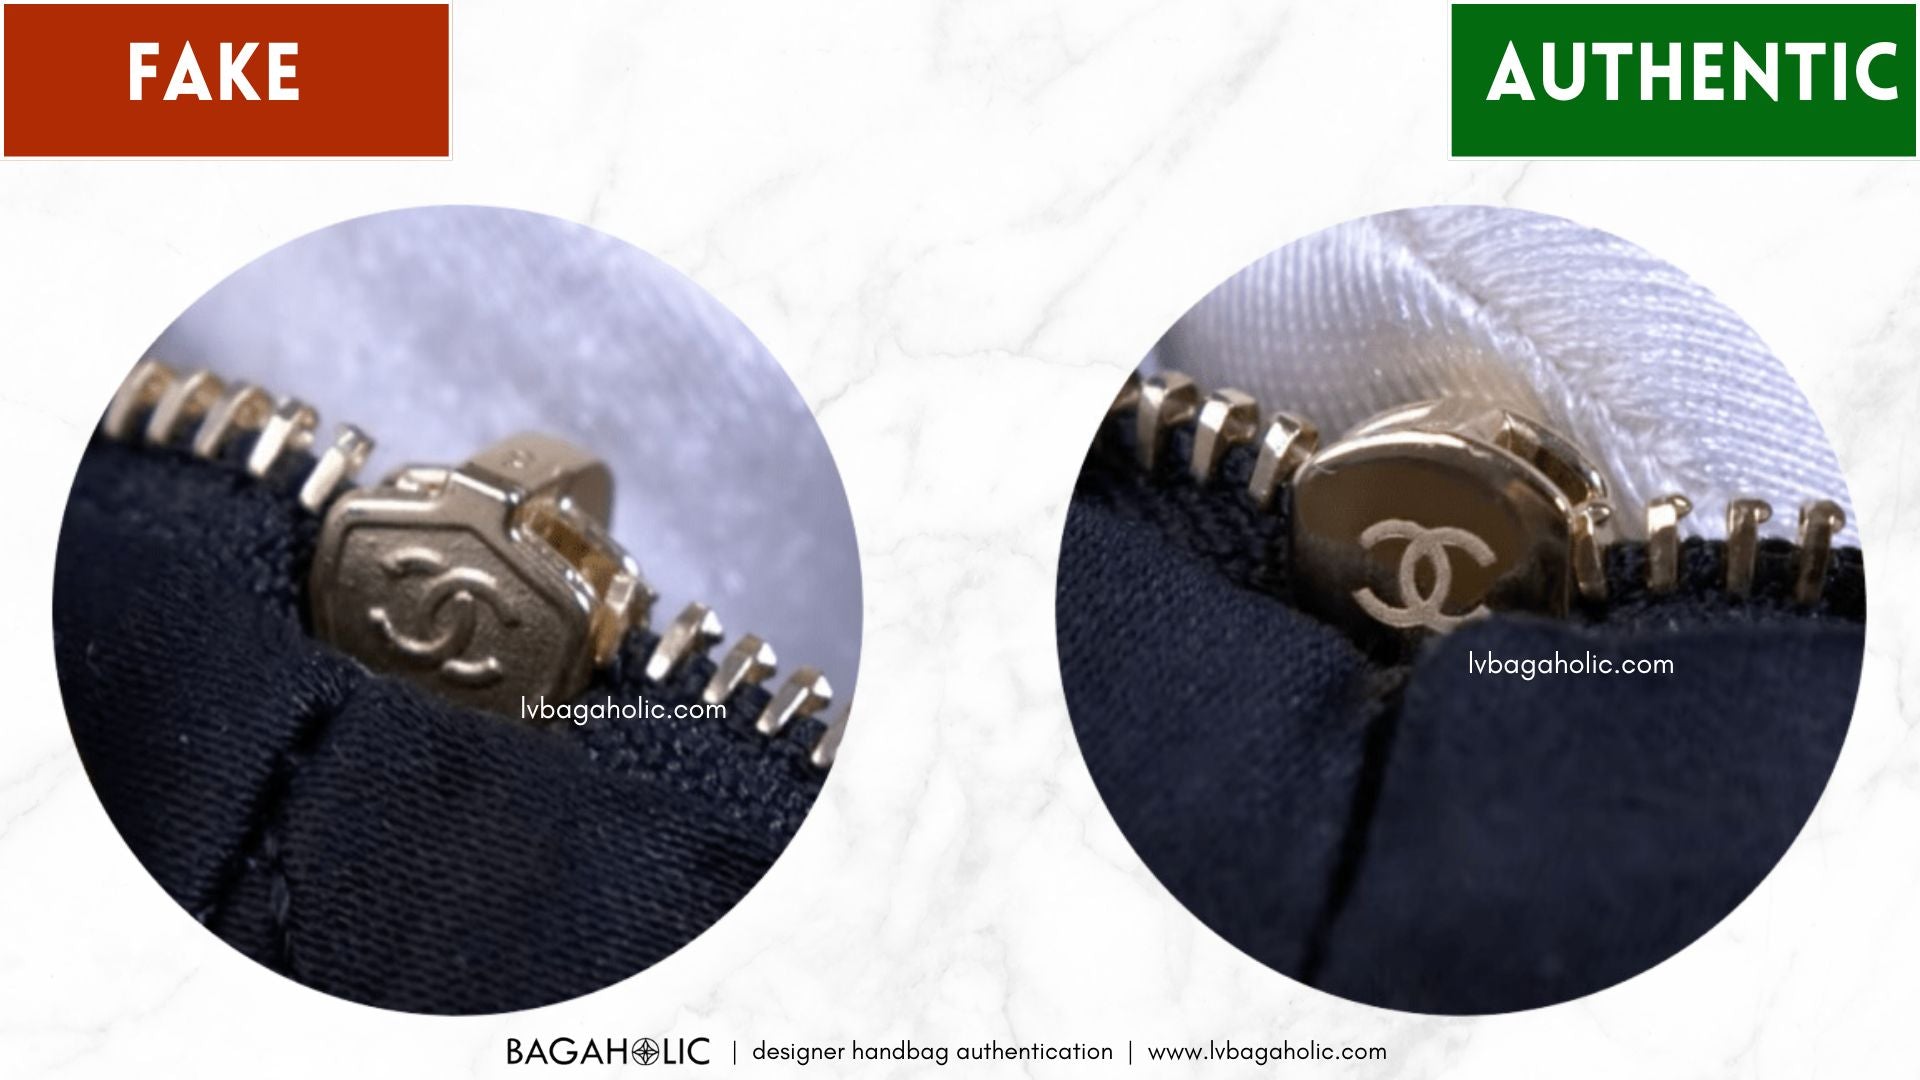 How to Tell If a Chanel 22 bag is real or fake zipper